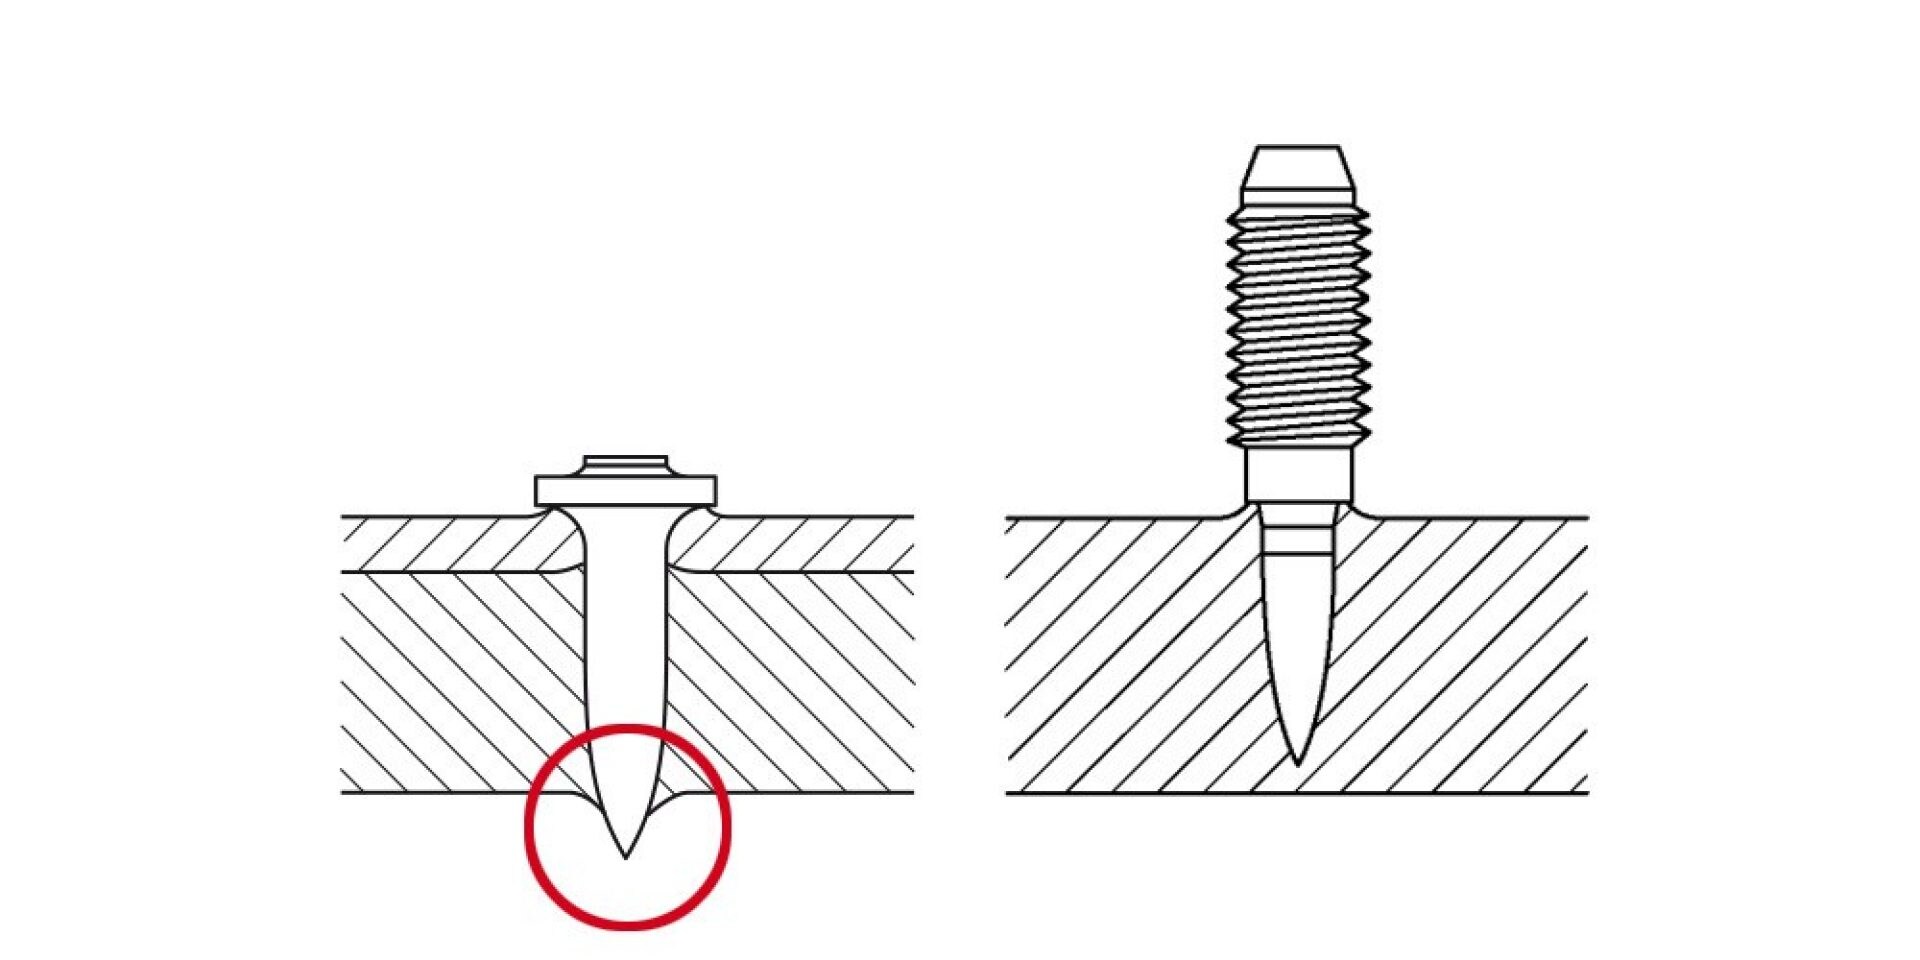 Diagram of a cross-section of steel showing sharp tip fastening